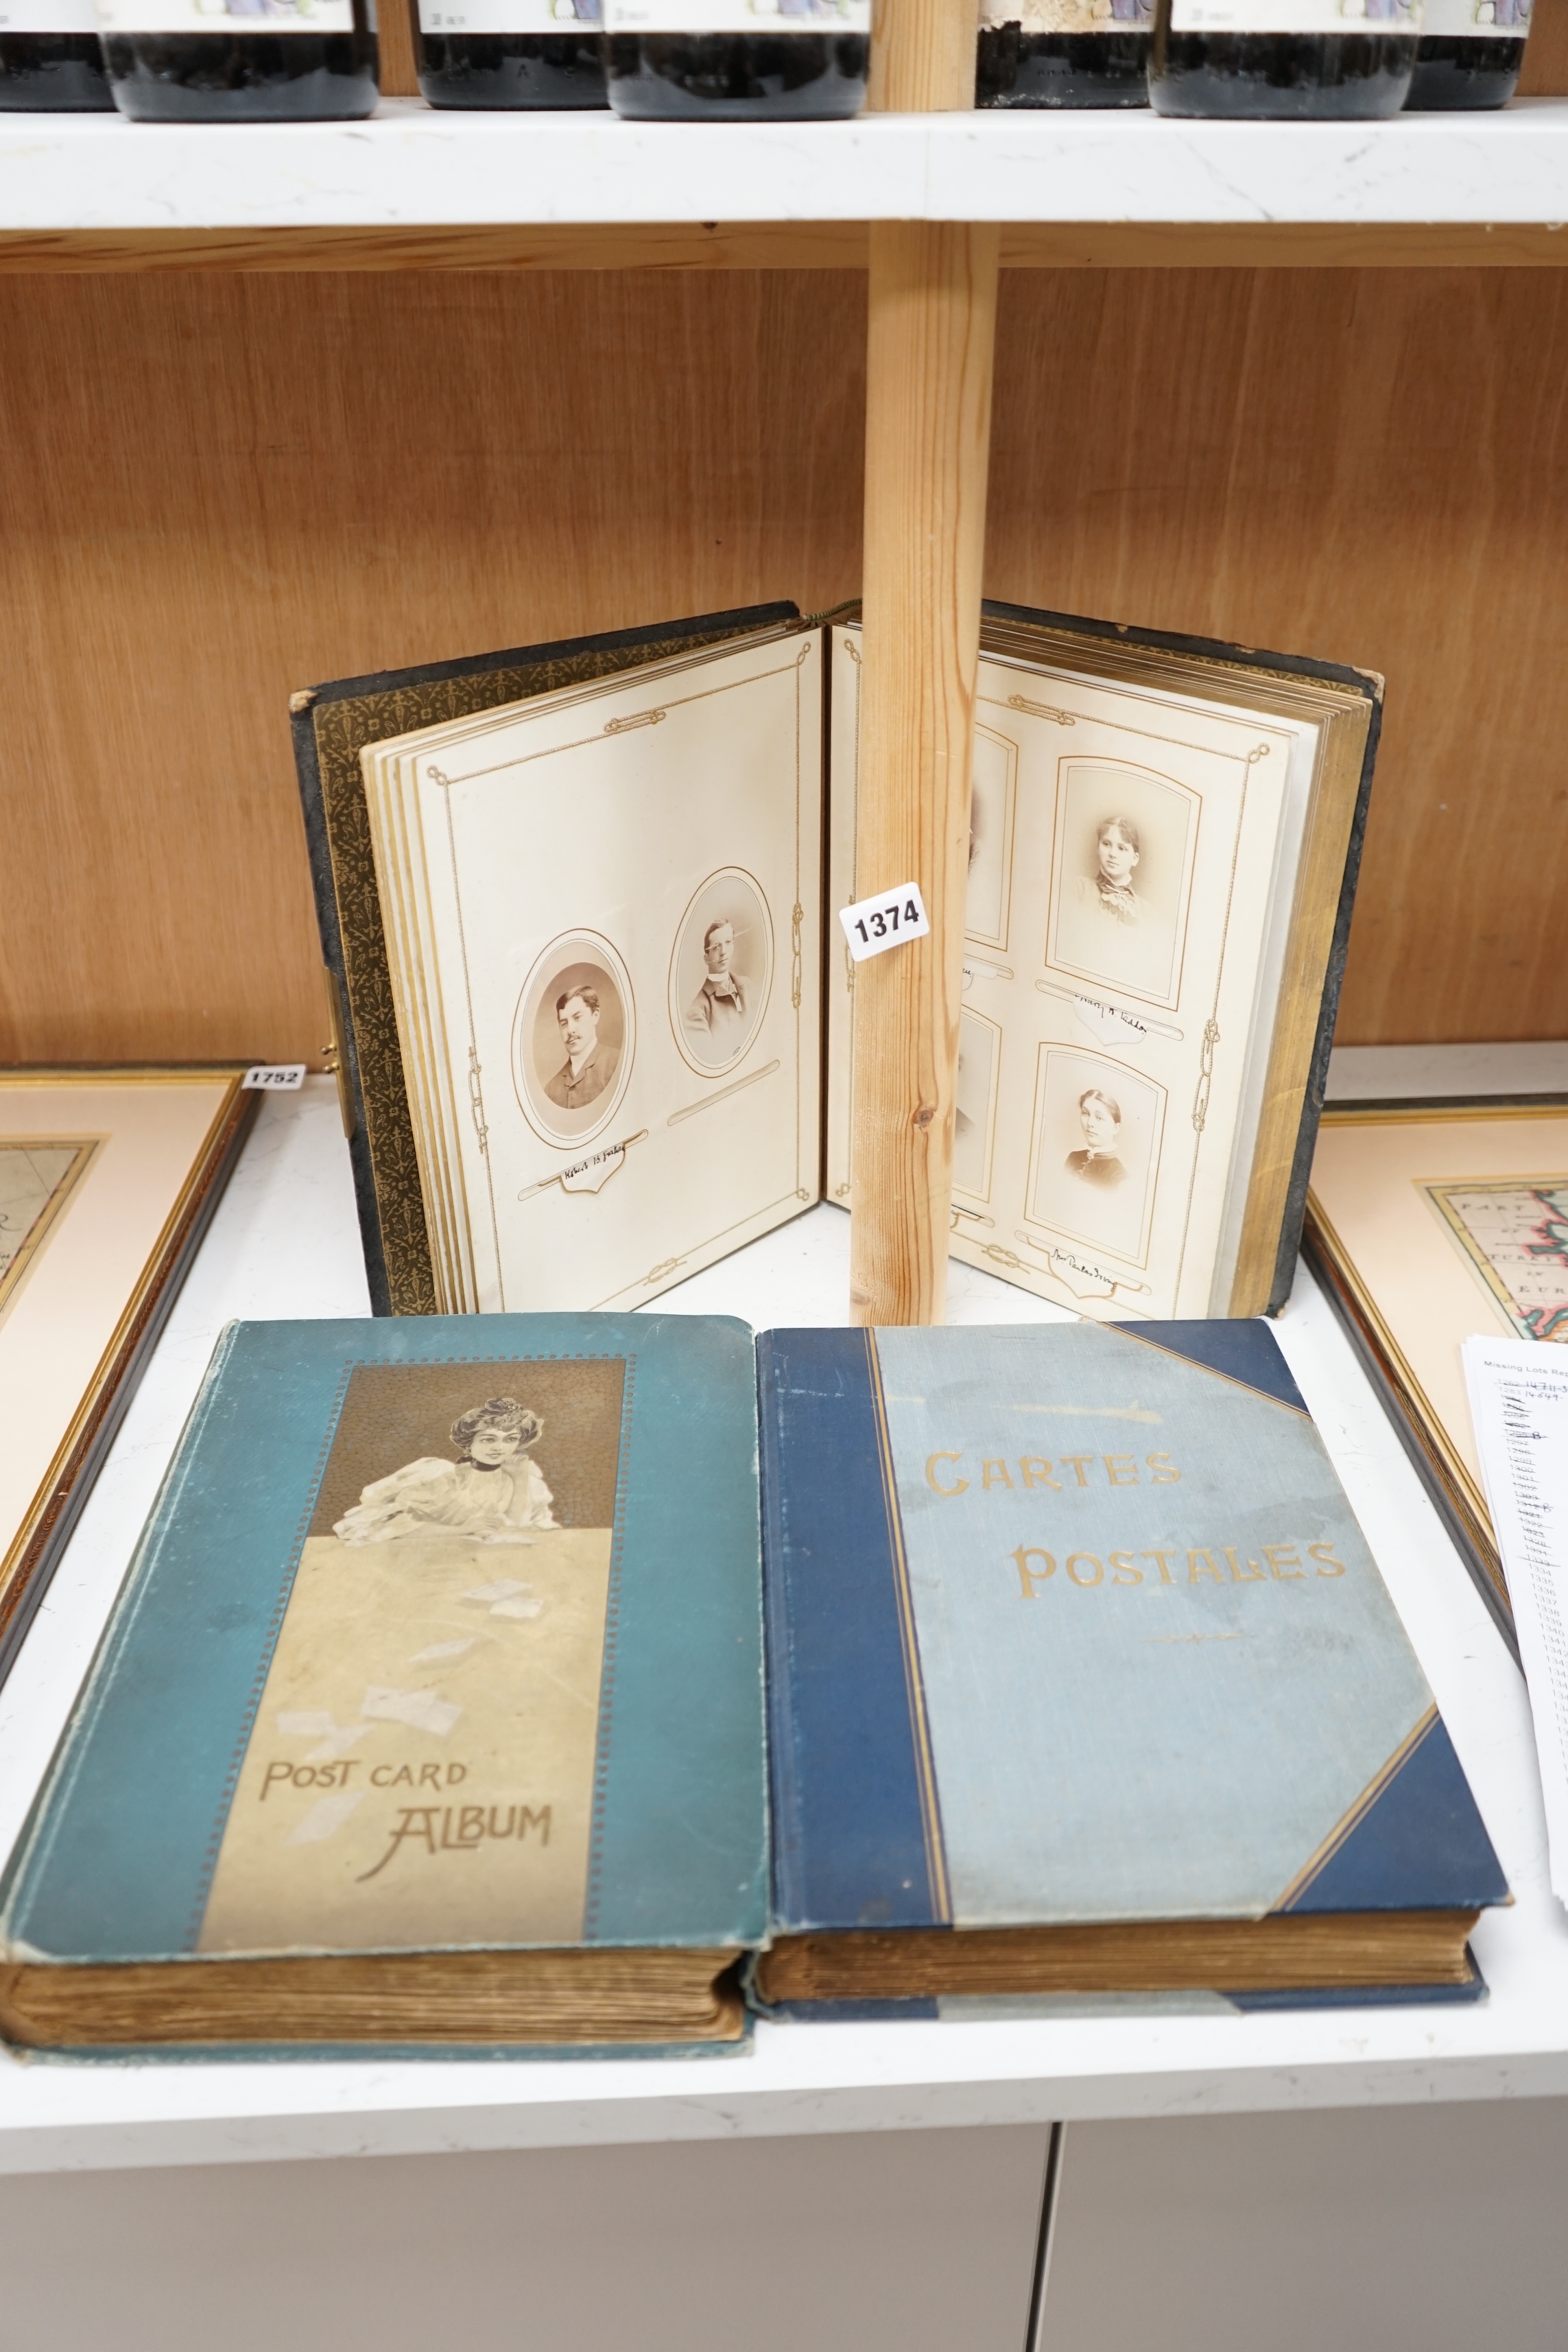 An Edwardian Royal commemorative photograph ‘nautical album’, mostly Royal Navy, leather bound, together with two early 20th century topographical, world and British postcard albums. Condition - good